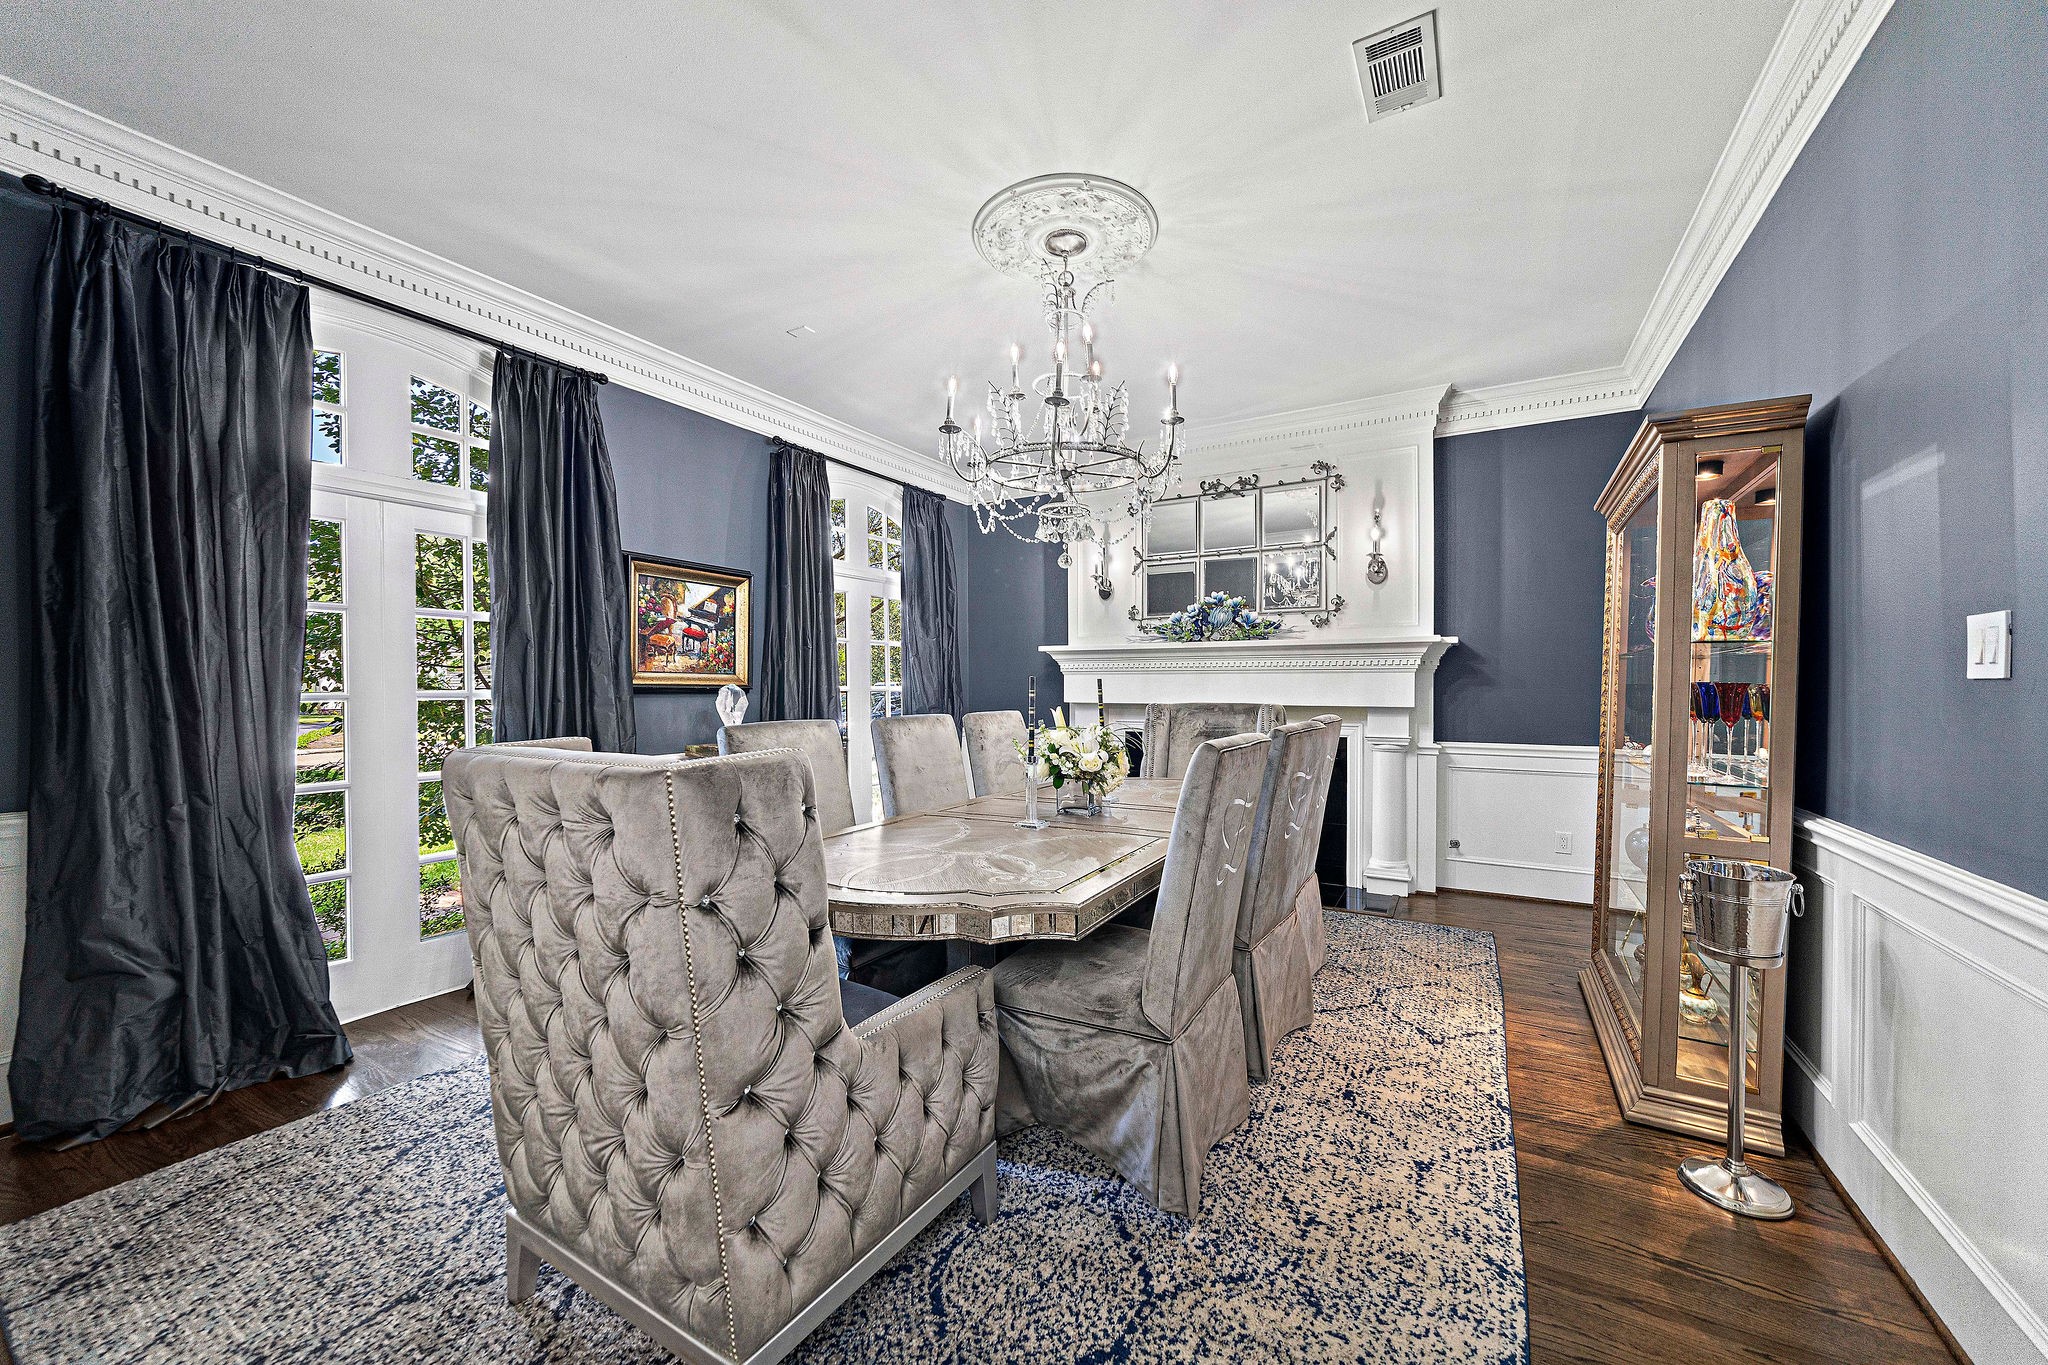 The stately fireplace and special-order chandelier are the finishing touches to this gorgeous room.